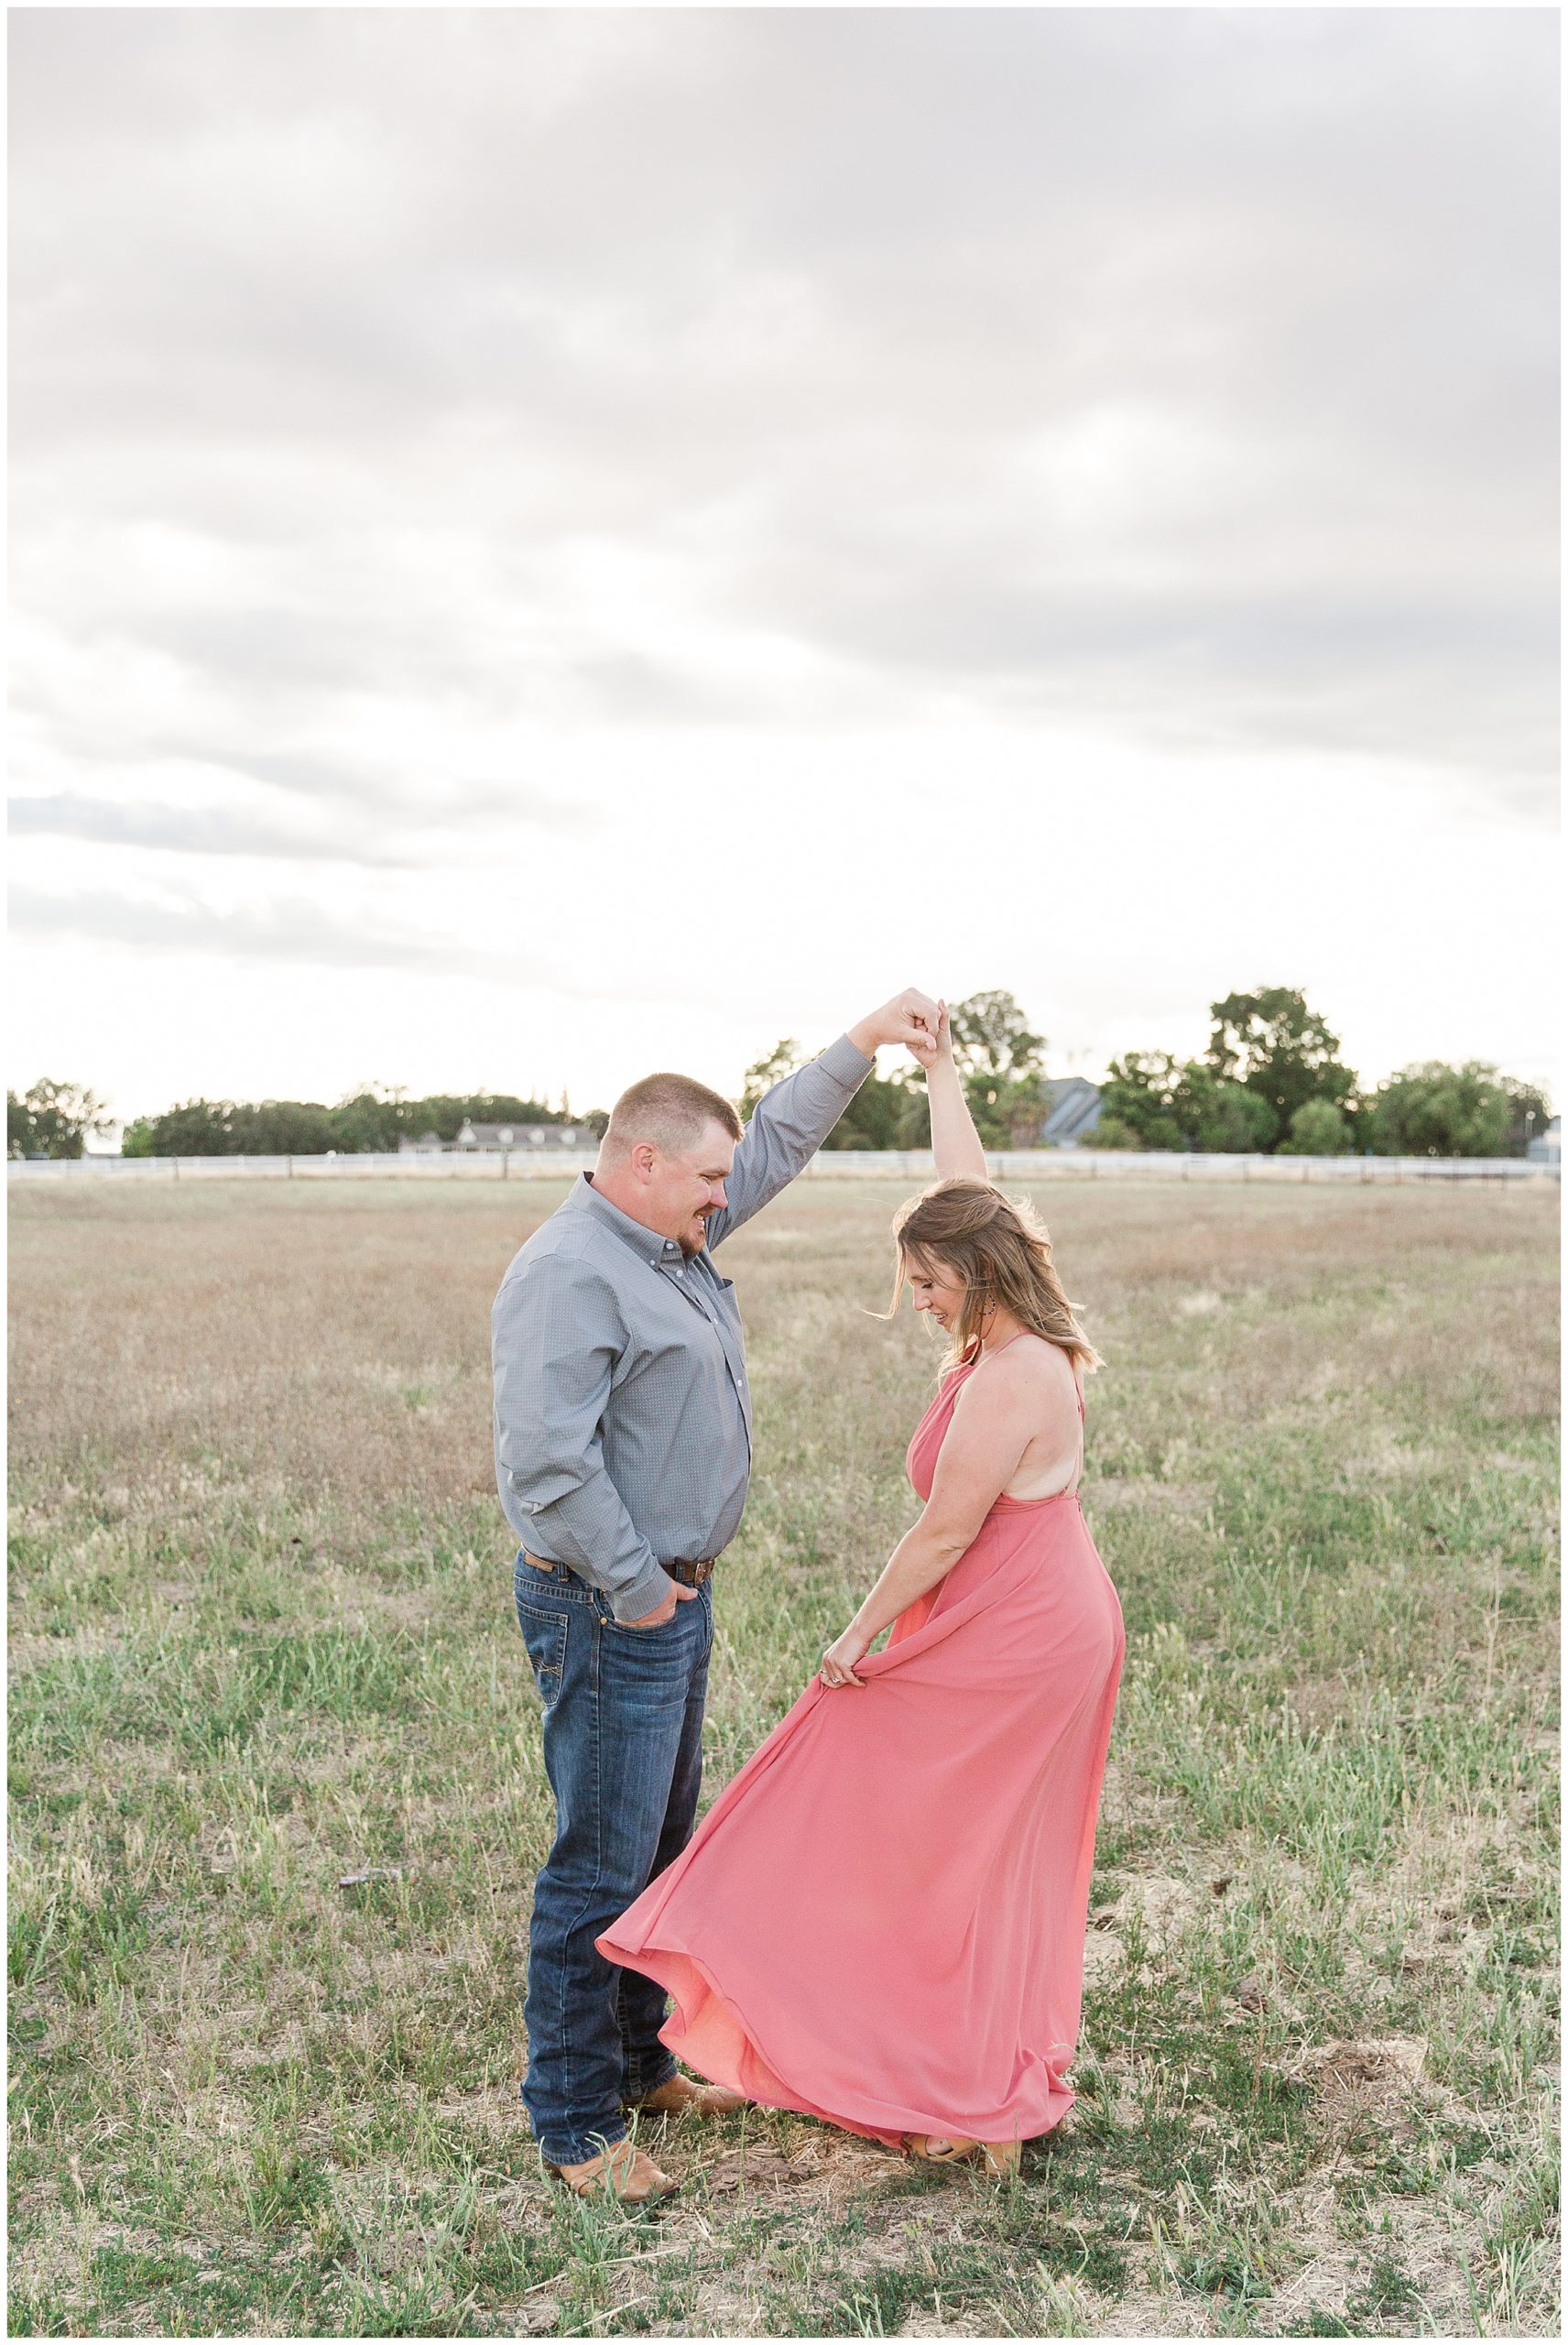 Ranch Engagement Session Twirling Under the Storm | Shay + Matt